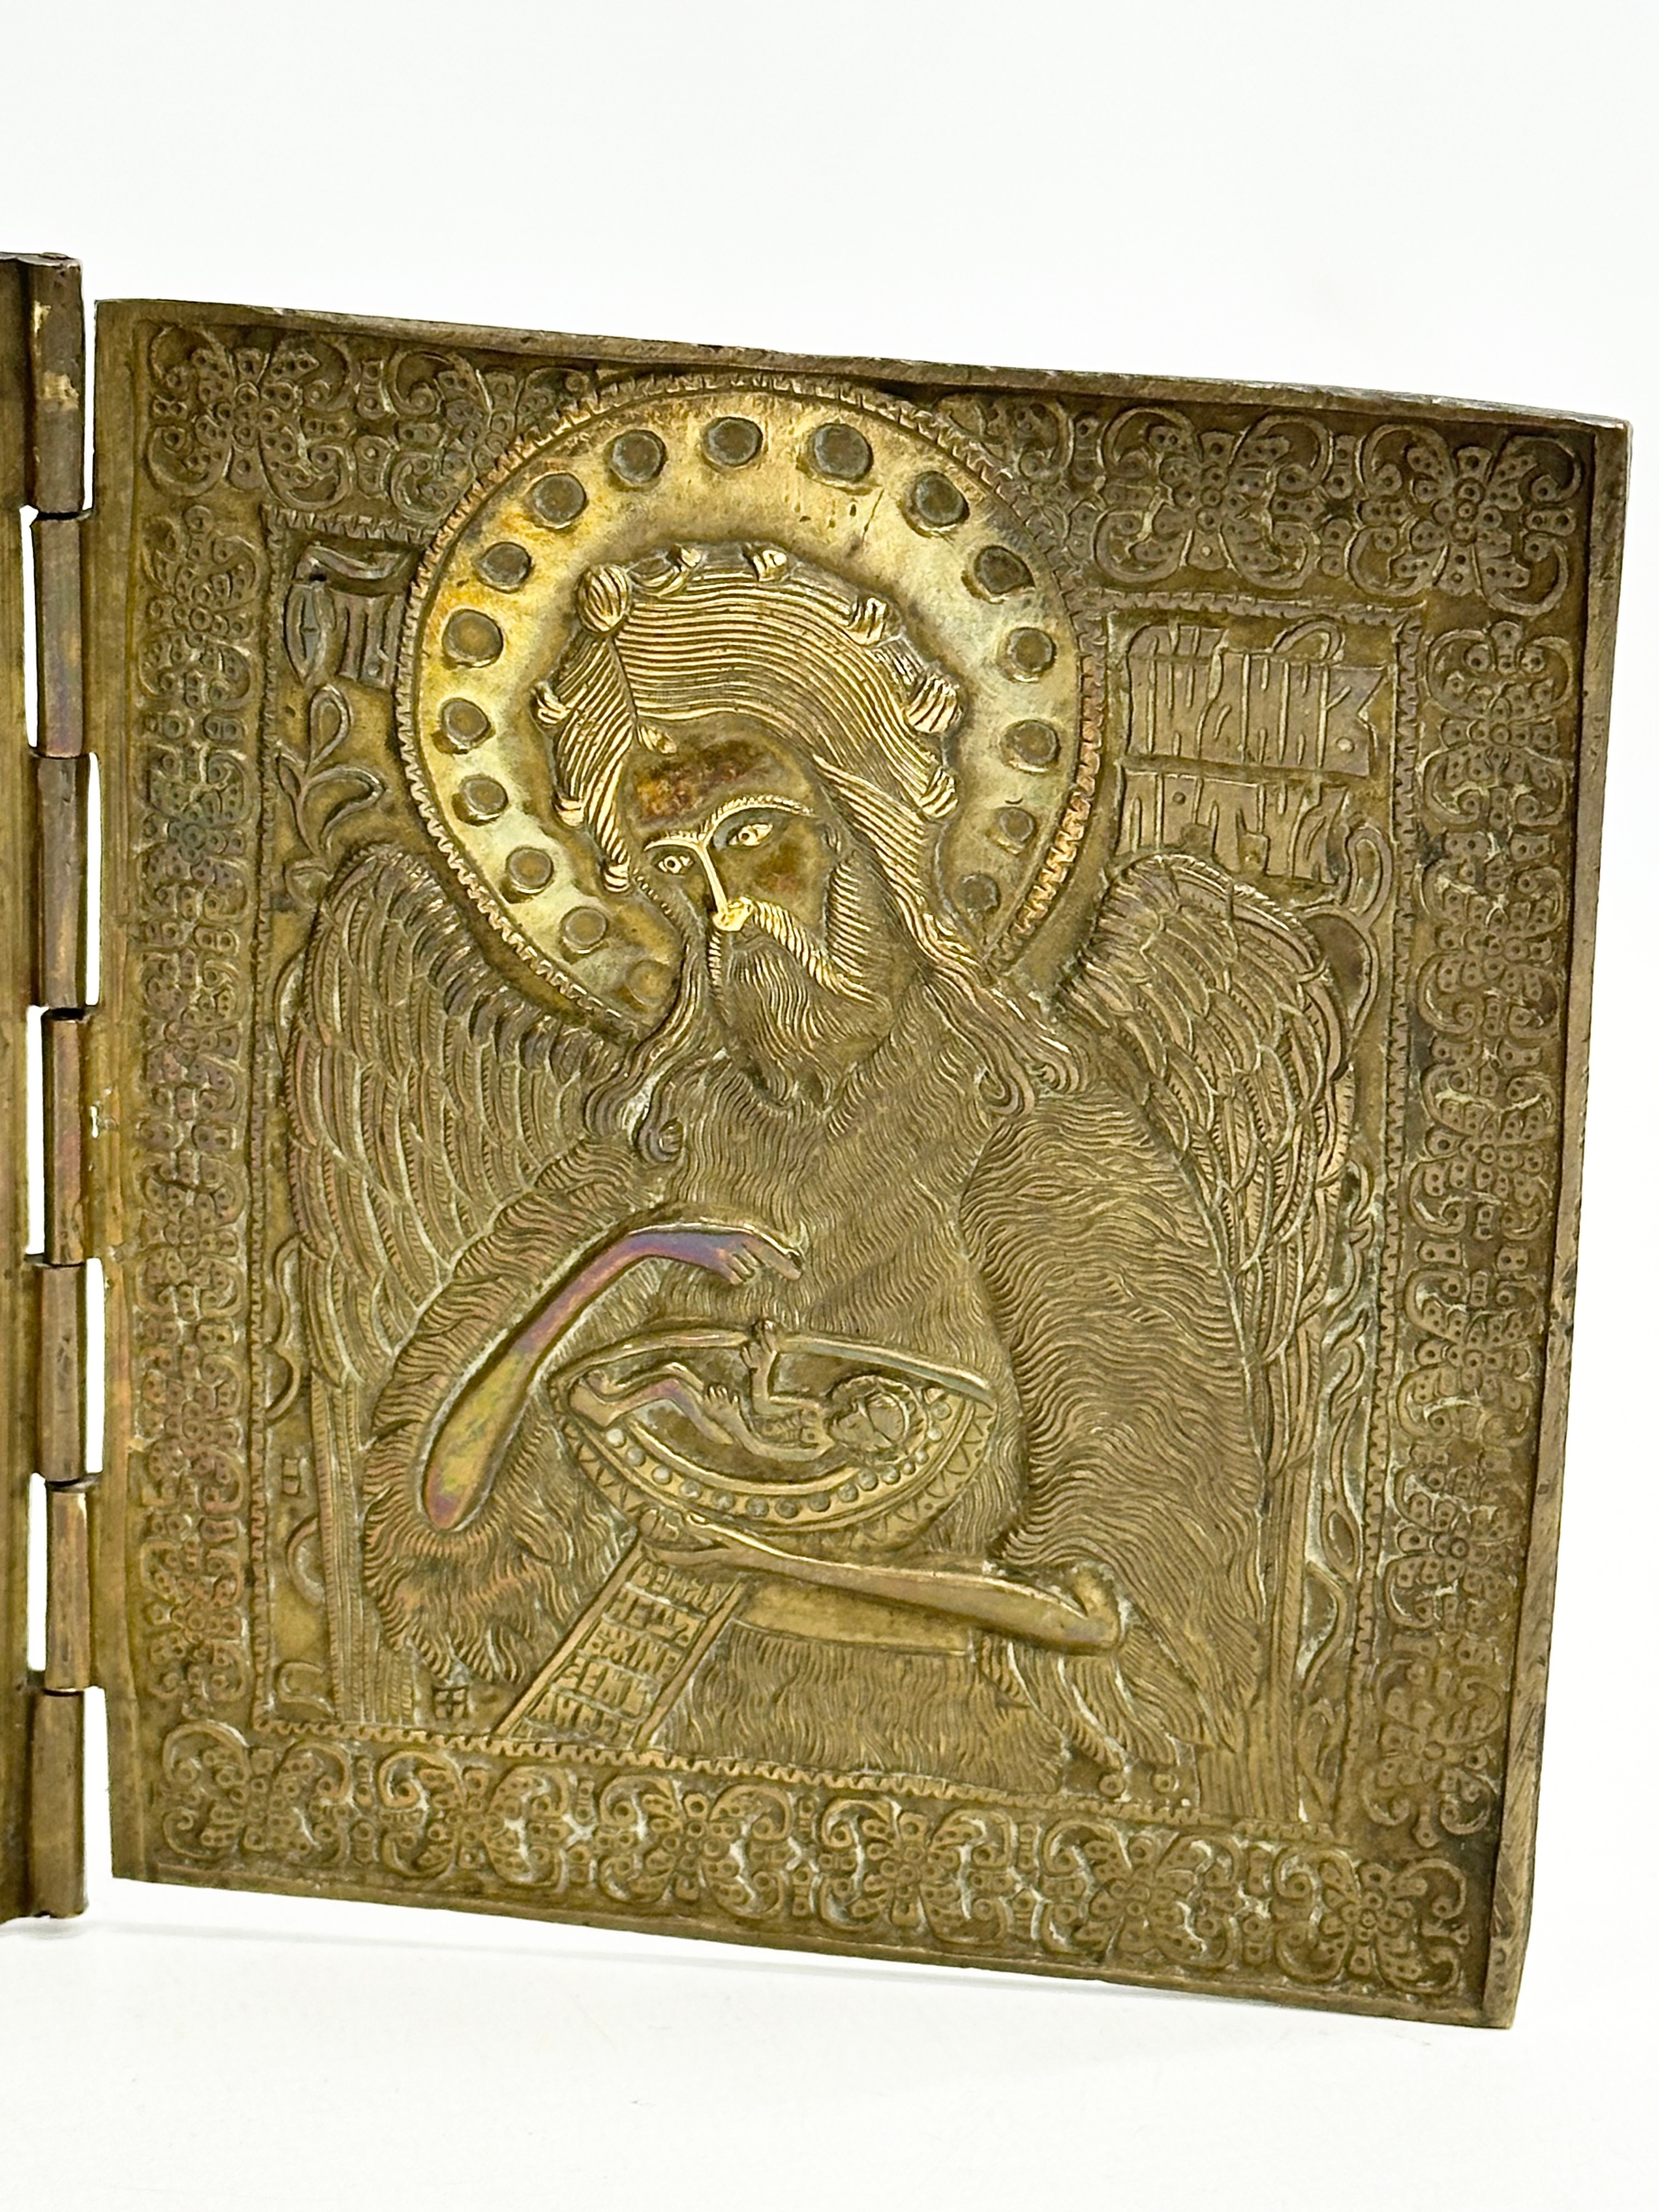 A Late 18th/Early 19th Century Russian Triptych brass religious icon. Open 36.5cm. 13x14.5cm closed. - Image 3 of 11